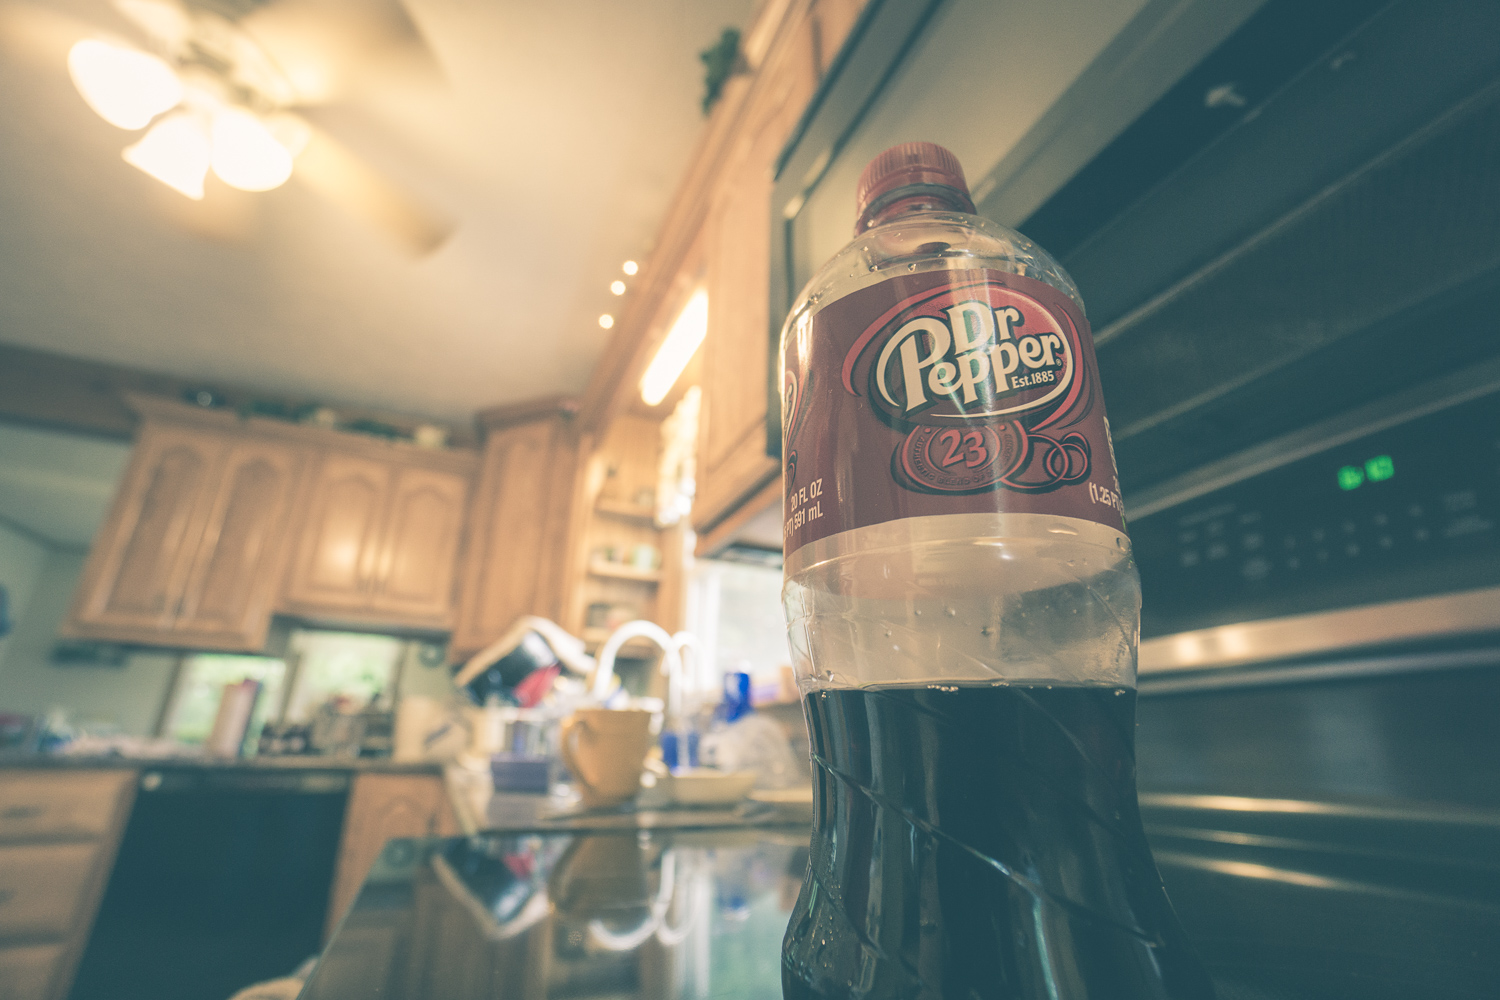 This is a Bottle of Dr Pepper.